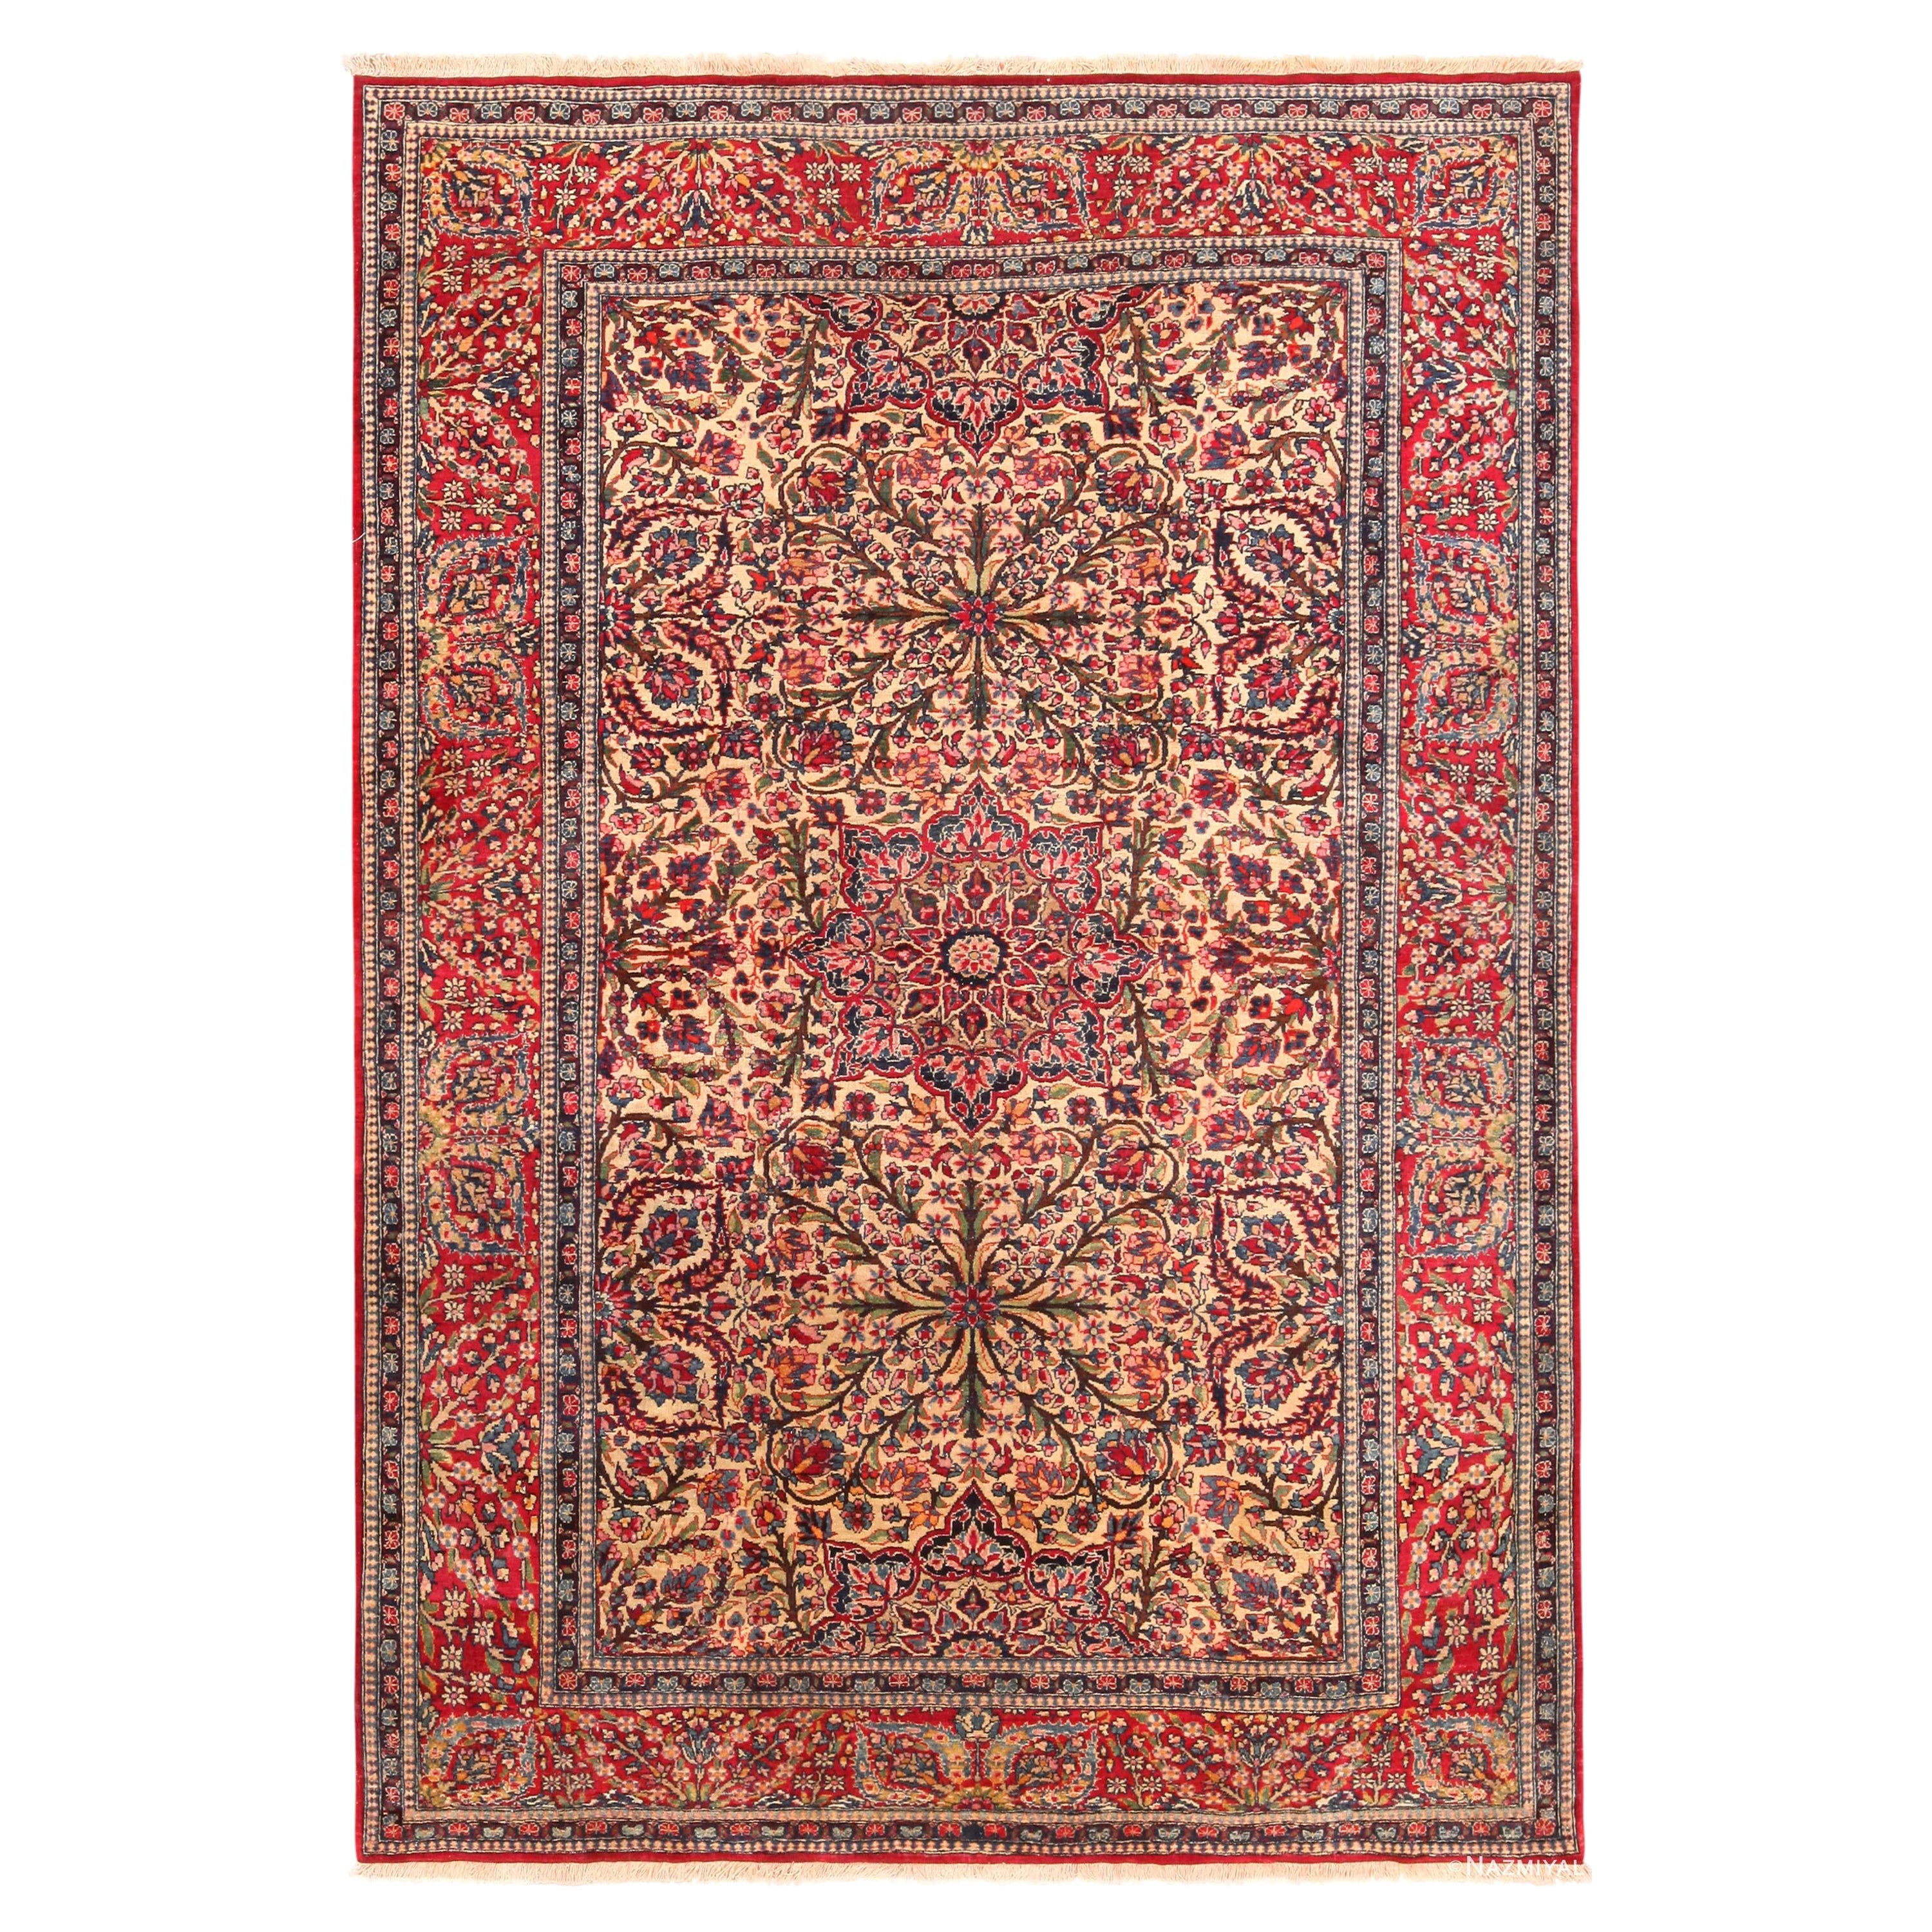 Antique Persian Isfahan Rug. Size 4 ft 6 in x 6 ft 8 in